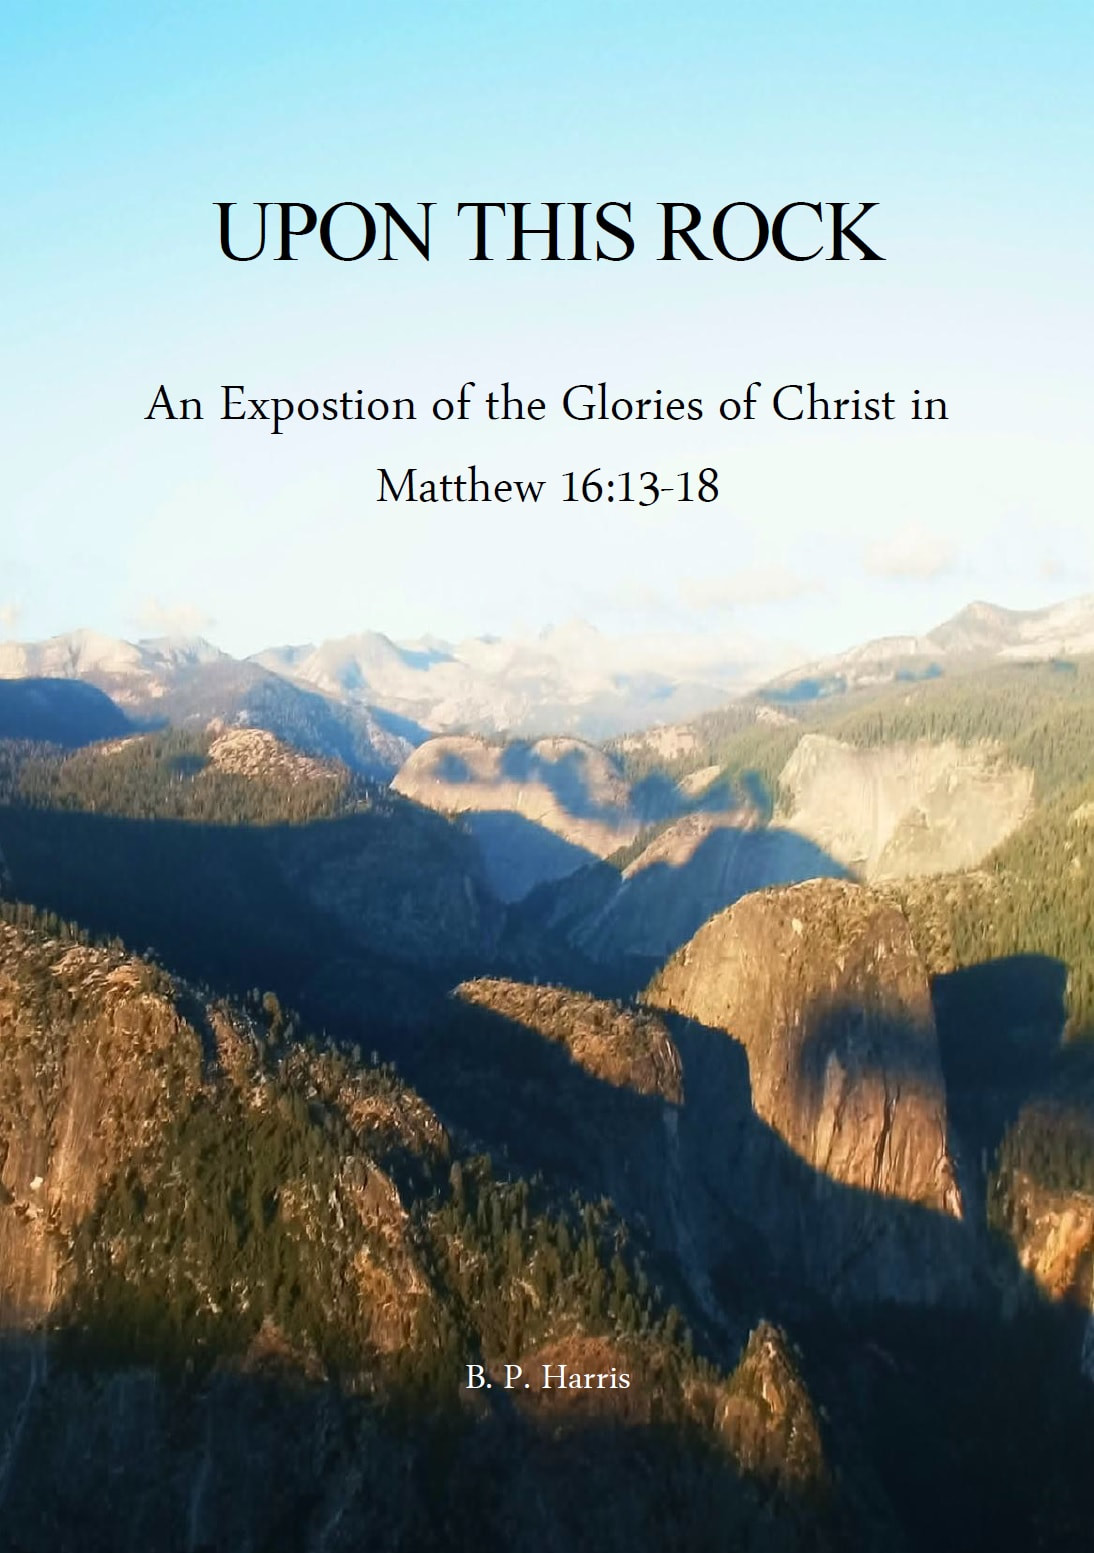 Upon This Rock: An Exposition of the Glories of Christ in Matthew 16:13-18